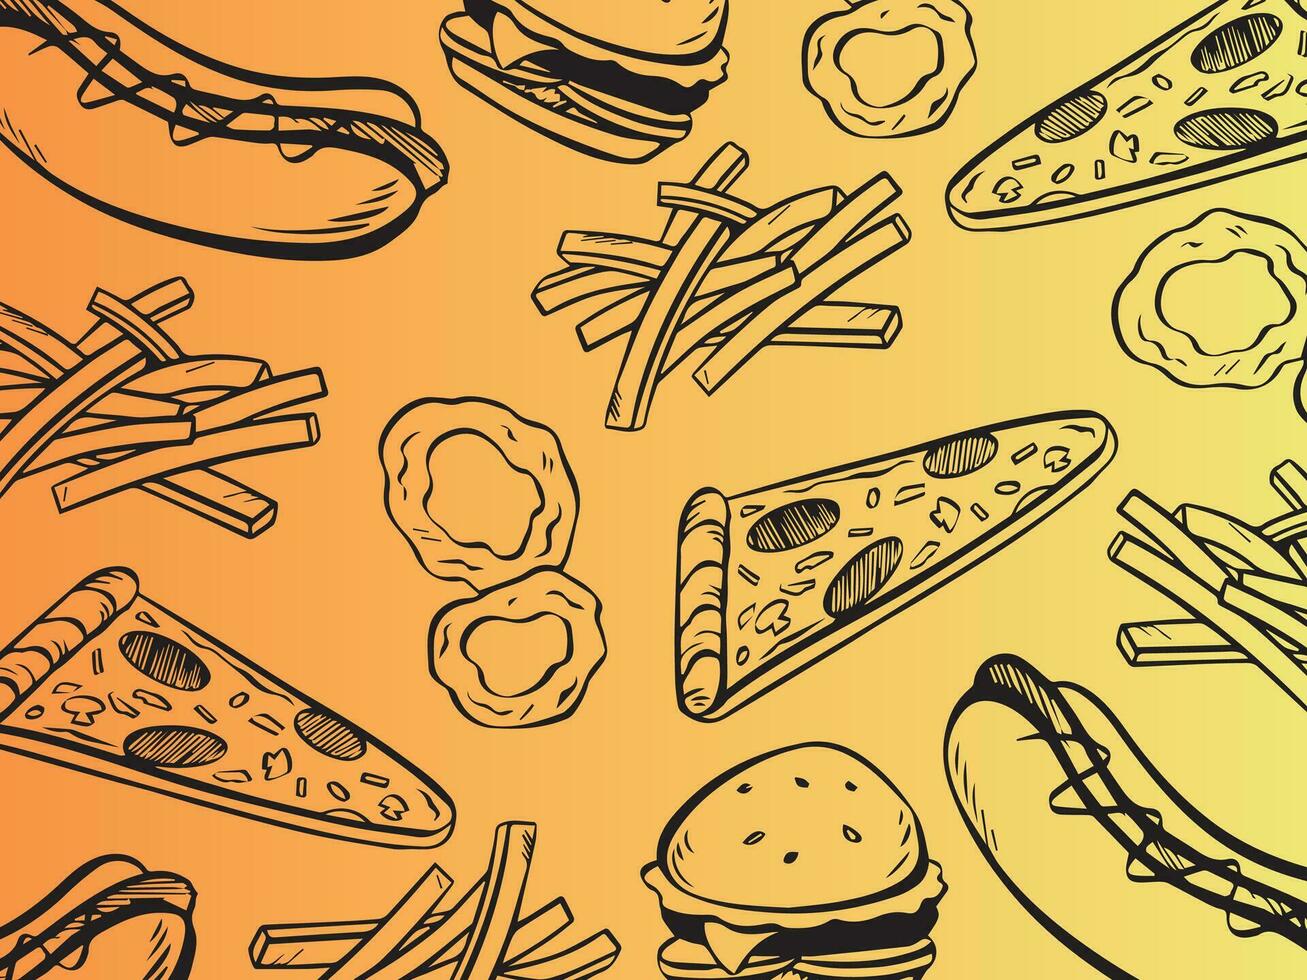 Fast american food black outlined vector illustration drawing isolated on horizontal gradient fried yellow orange background. Simple banner poster design for fast food restaurant.